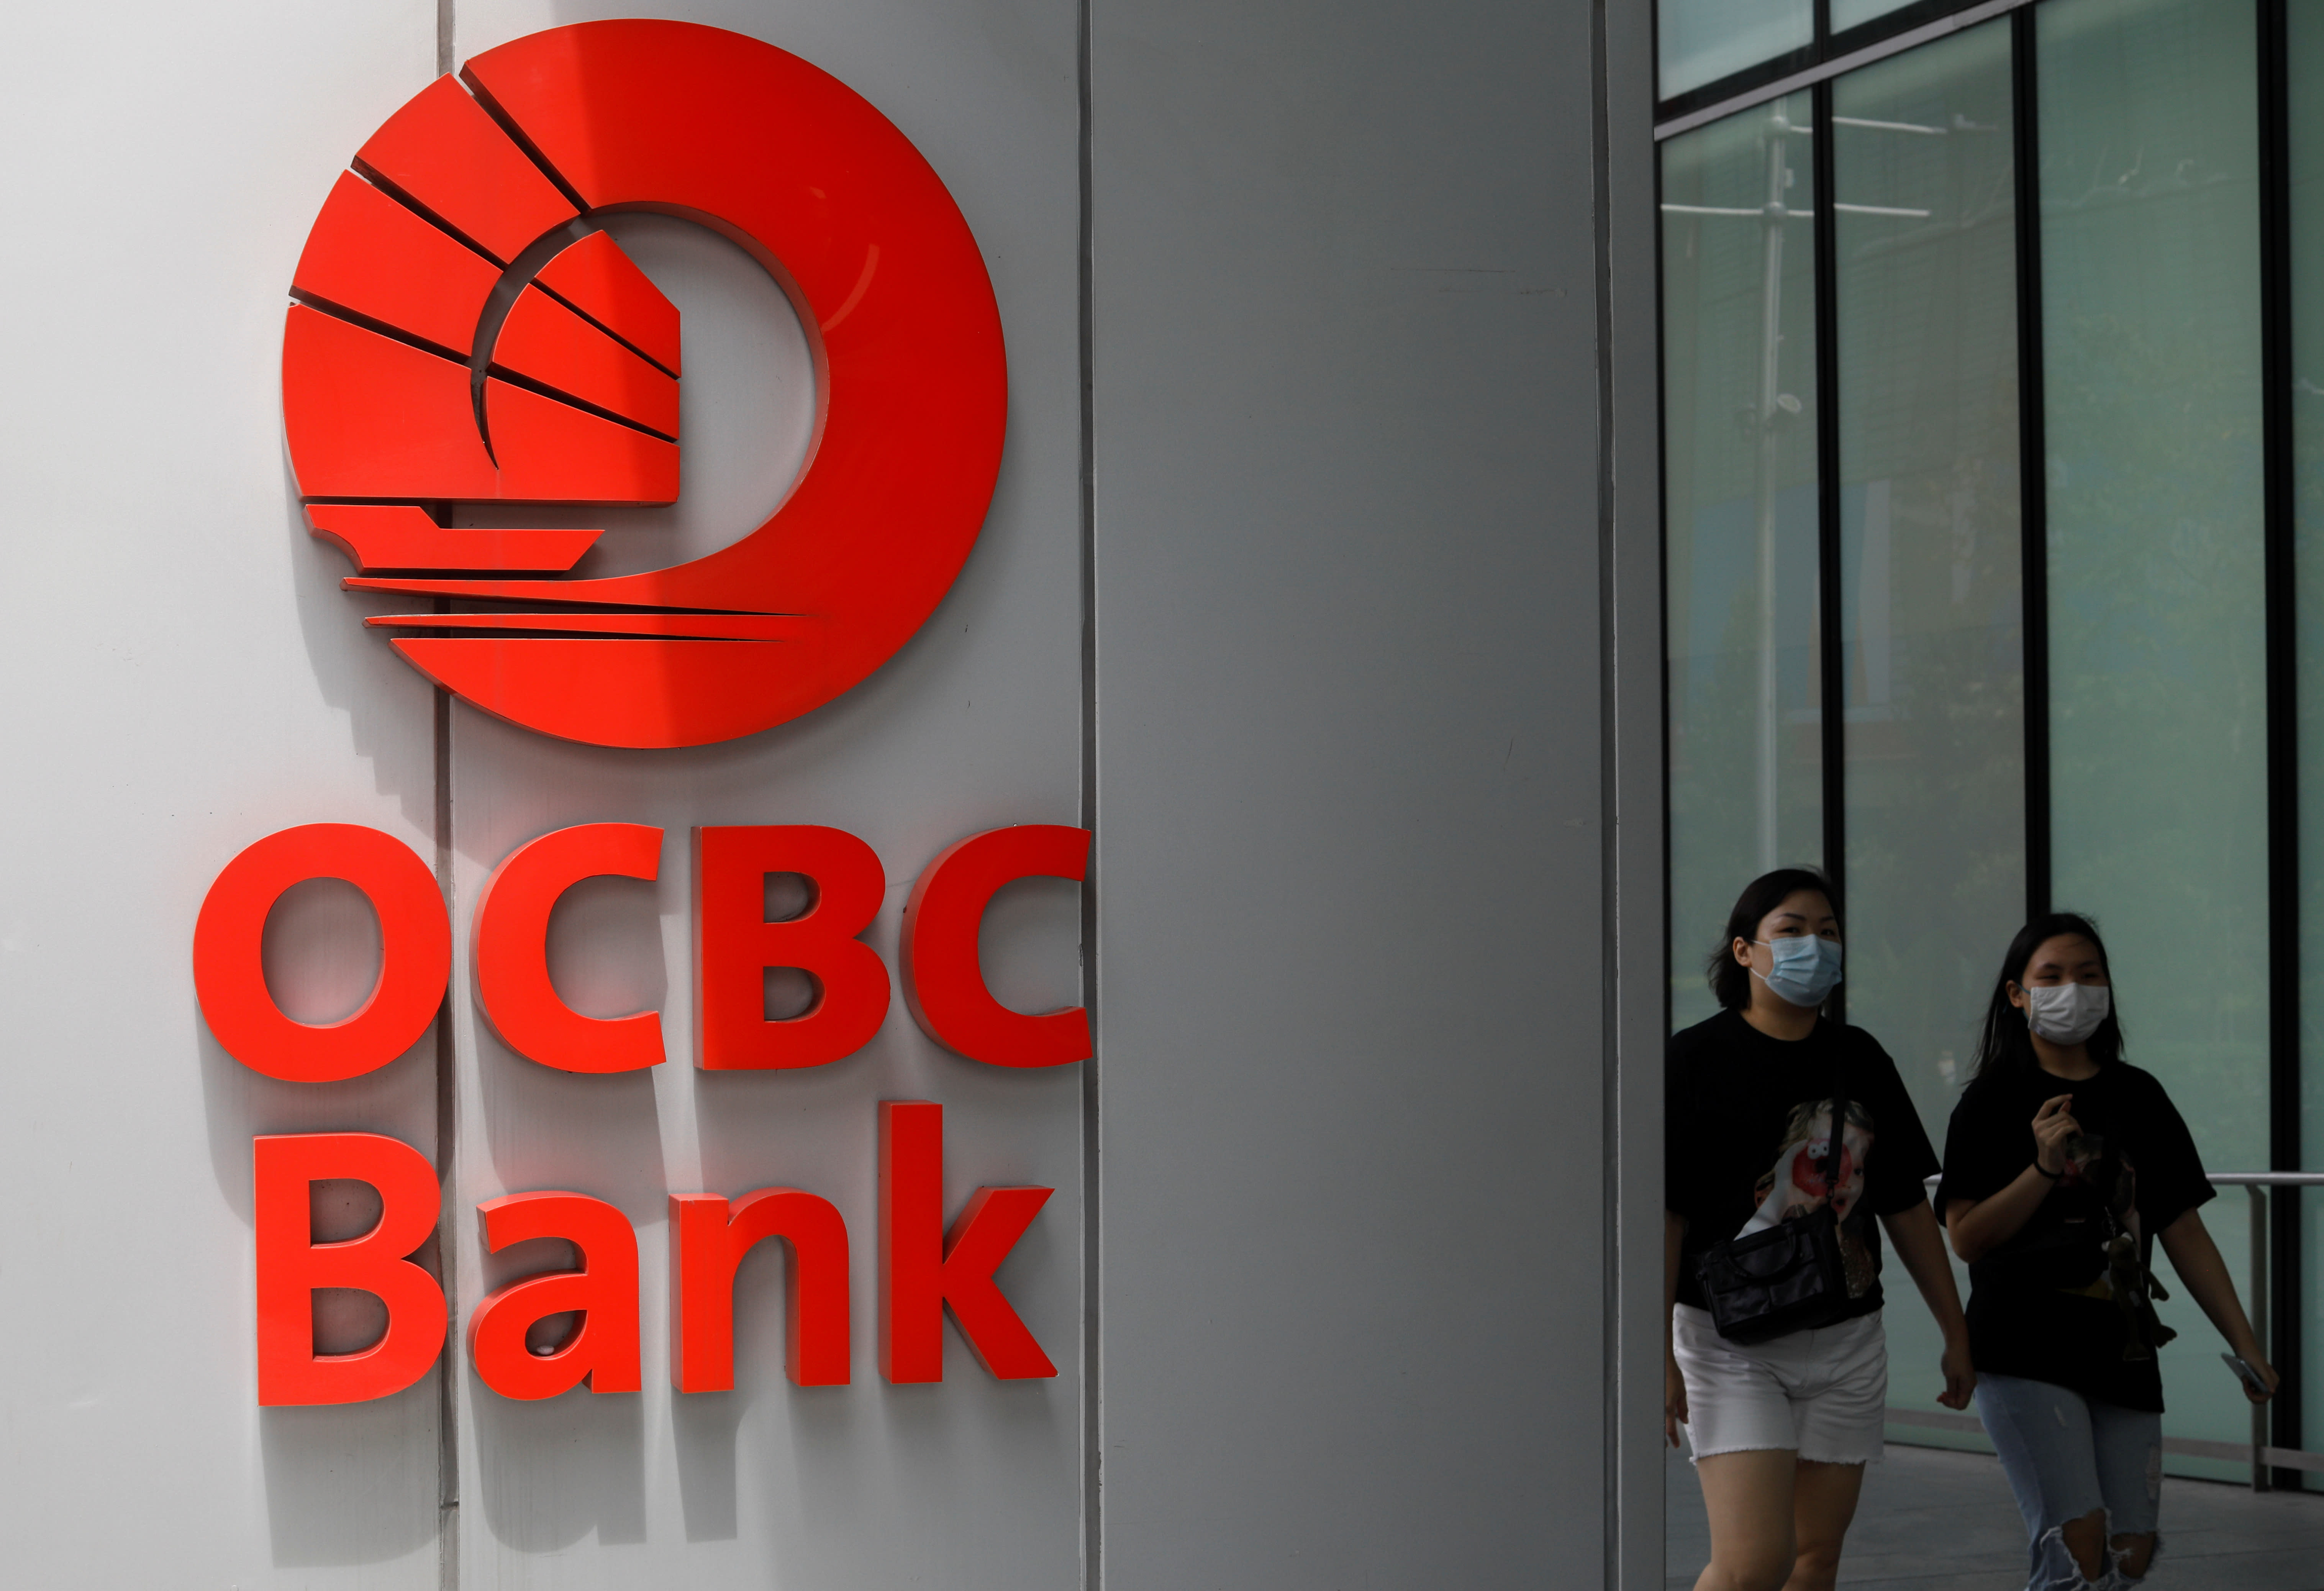 OCBC phishing scam: 'Goodwill payouts' for 30 victims to date, all cases to be 'reviewed and validated thoroughly'